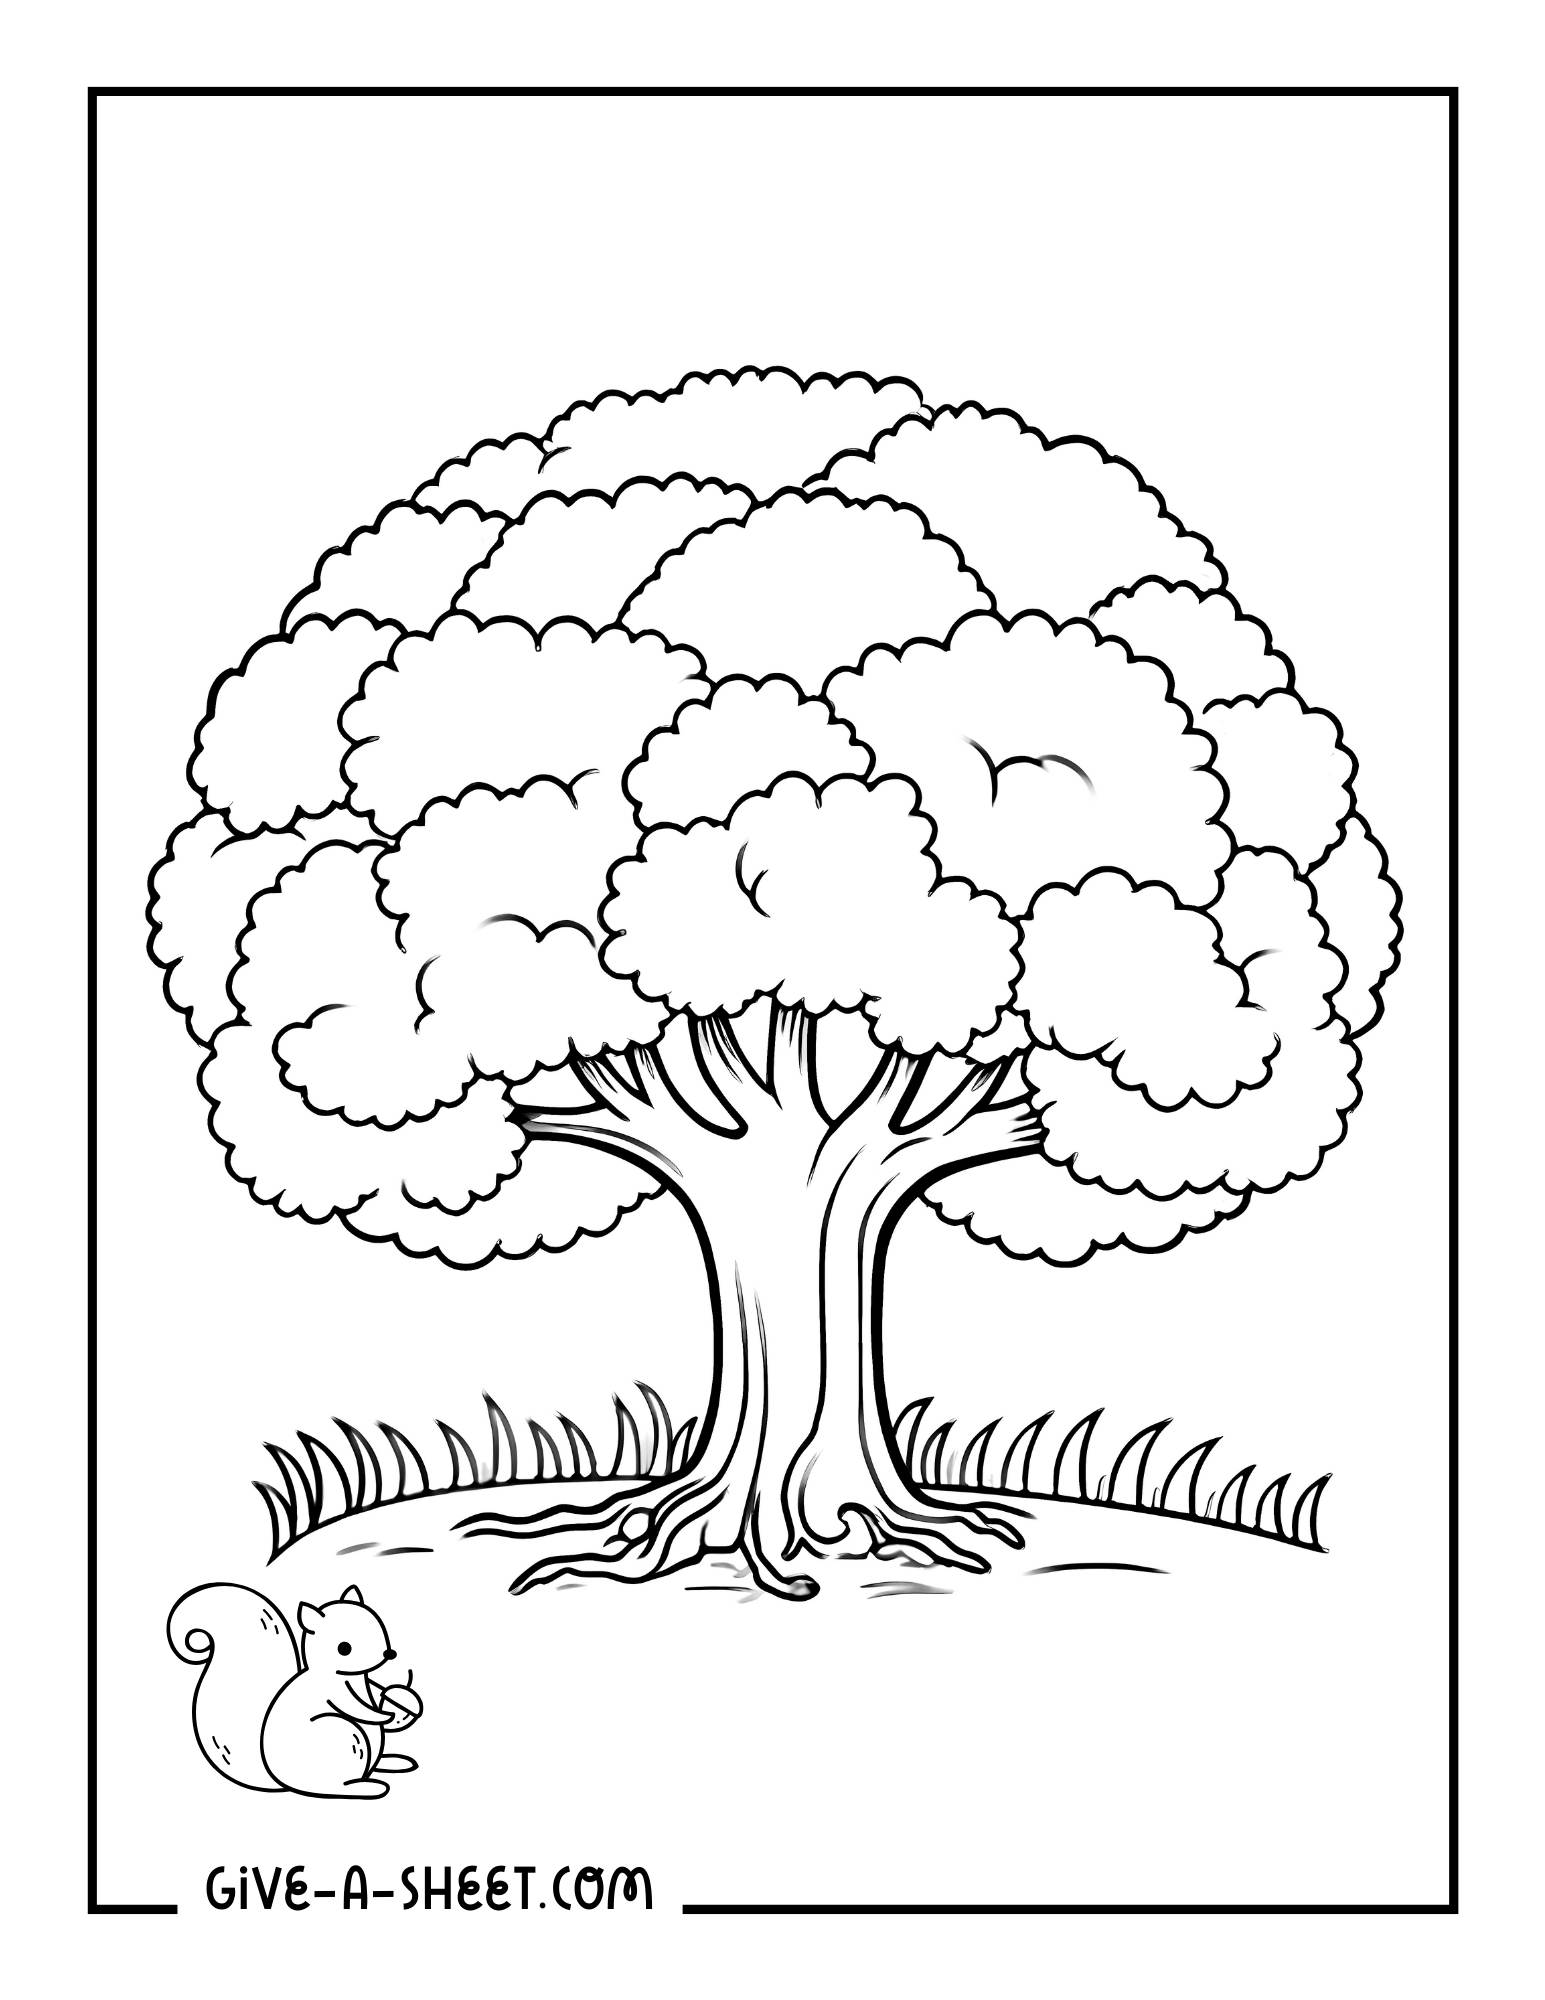 Deciduous tree with thick trunk and squirrel coloring page.